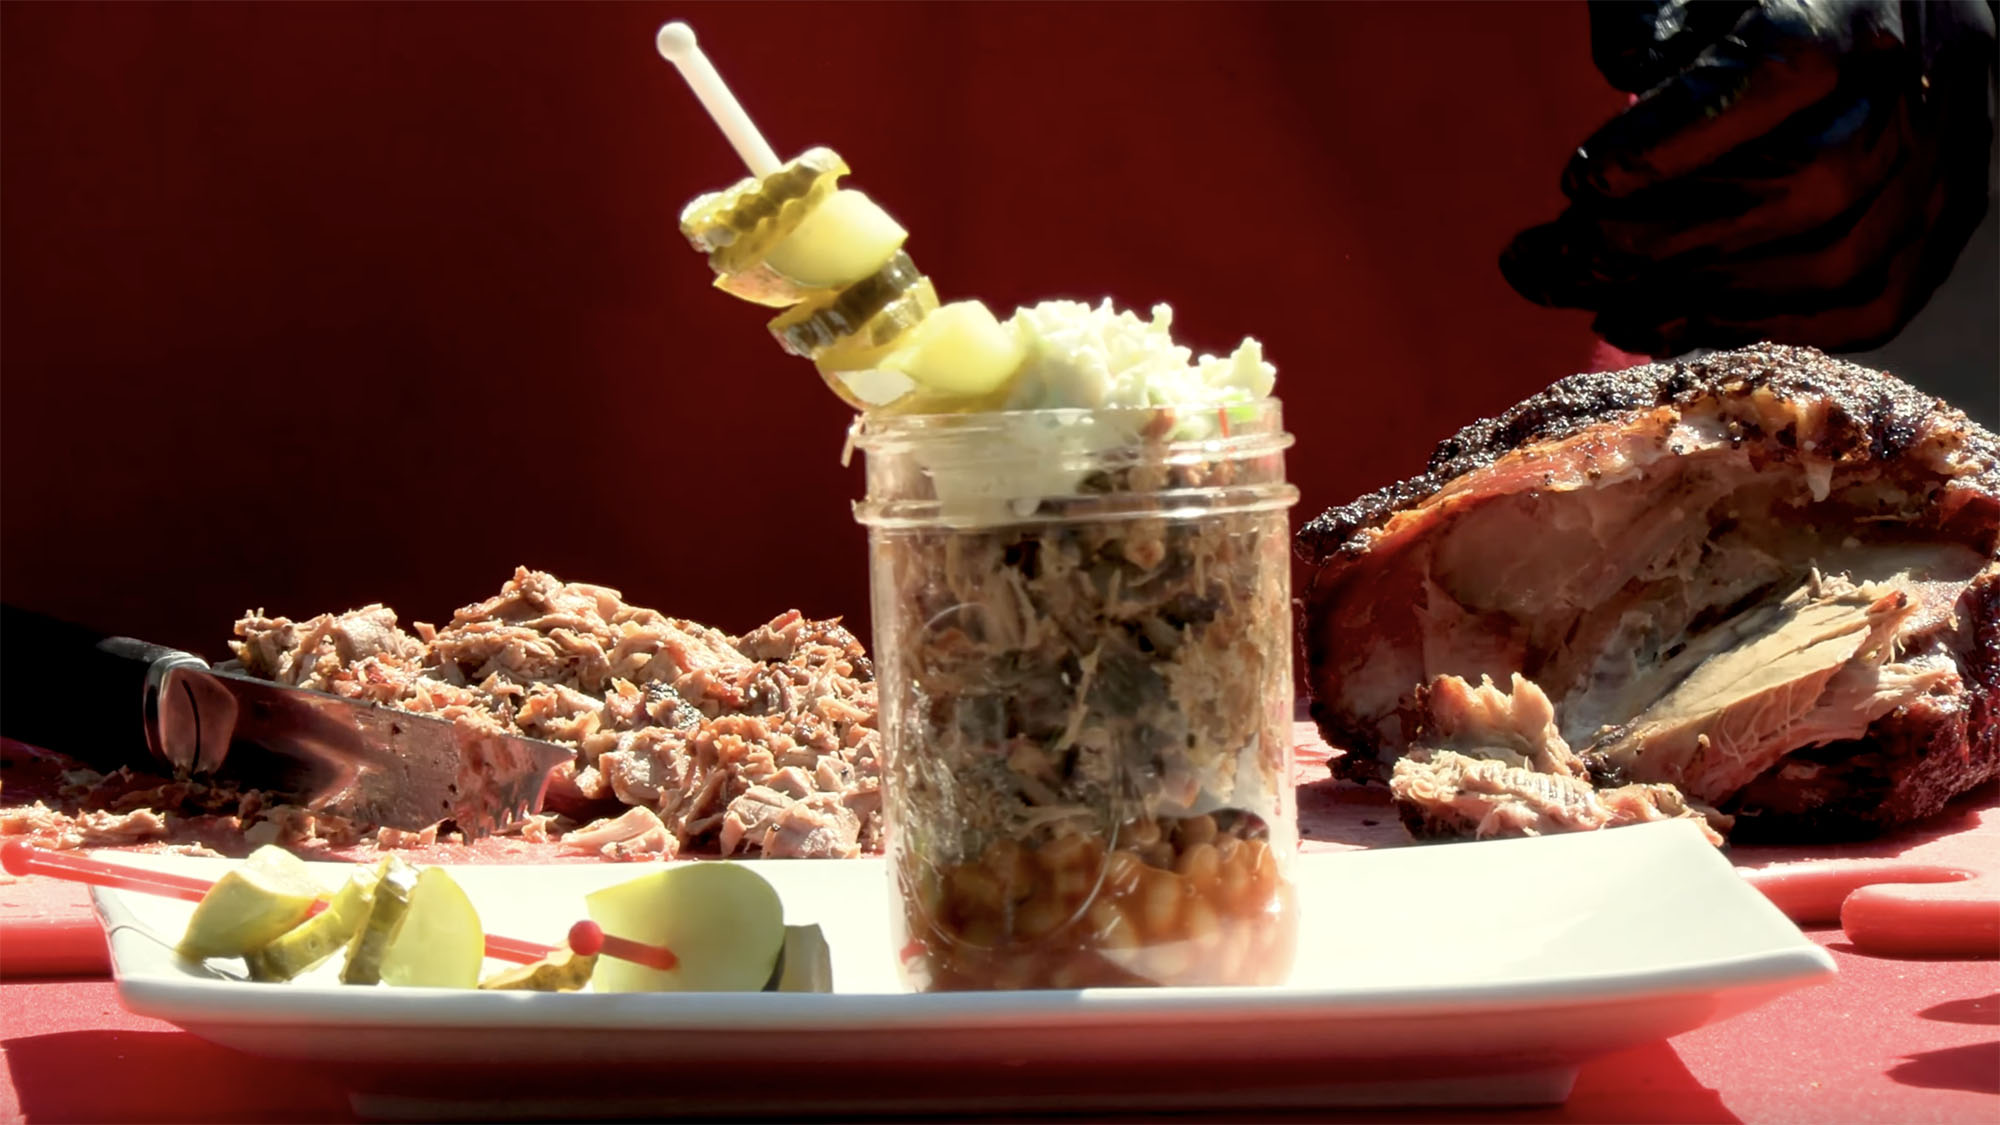 A glass jar with a "barbecue martini" consisting of pork barbecue, baked beans, cole slaw and pickles sits on a white plate while displayed on a red tabletop outdoors.